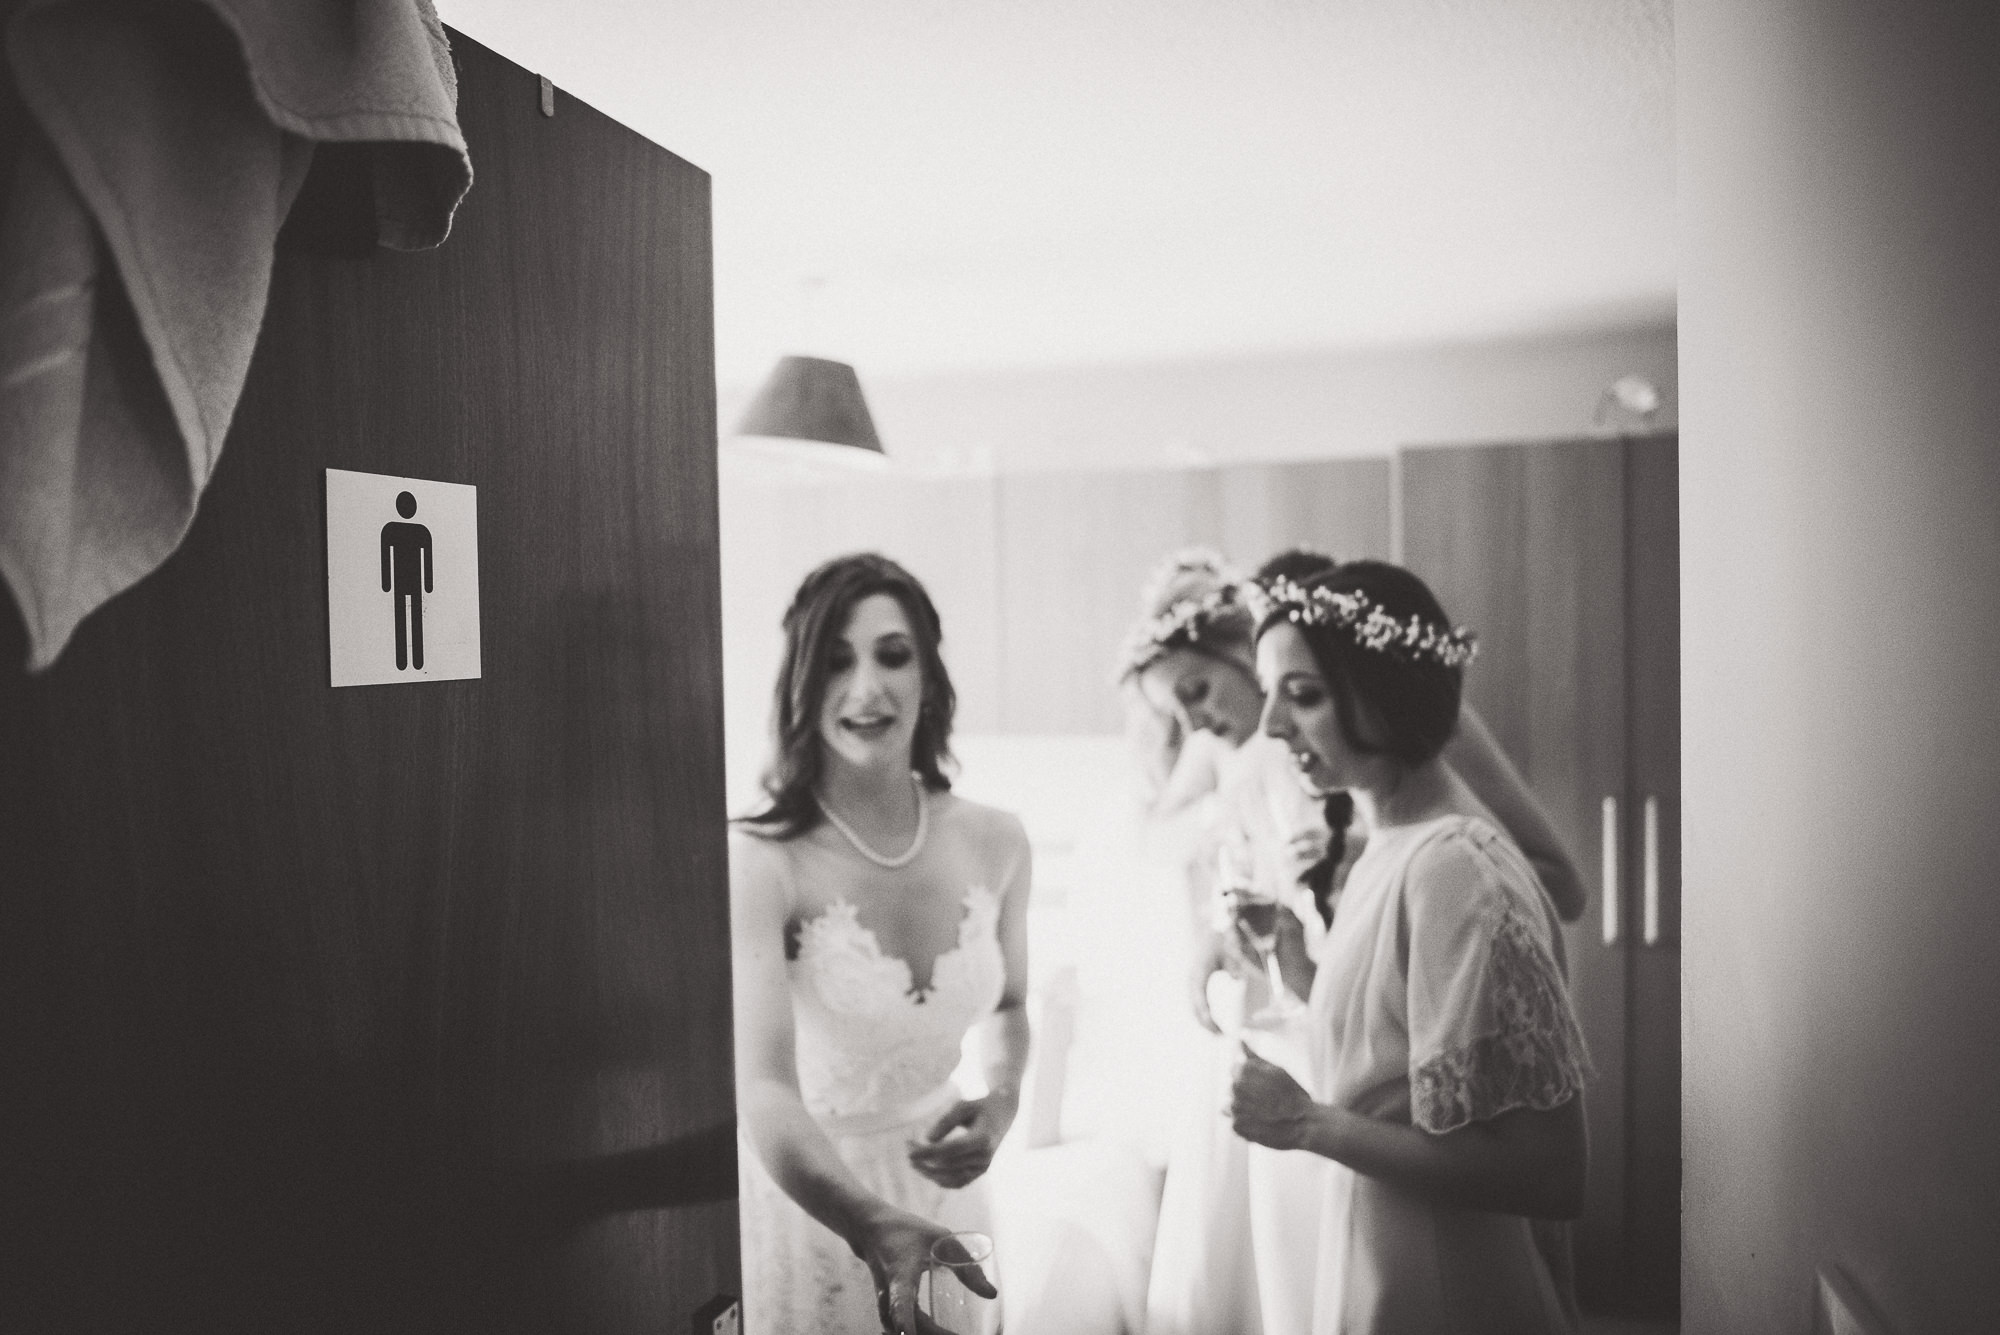 A bride and her bridesmaids are getting ready for a wedding, captured by a wedding photographer.